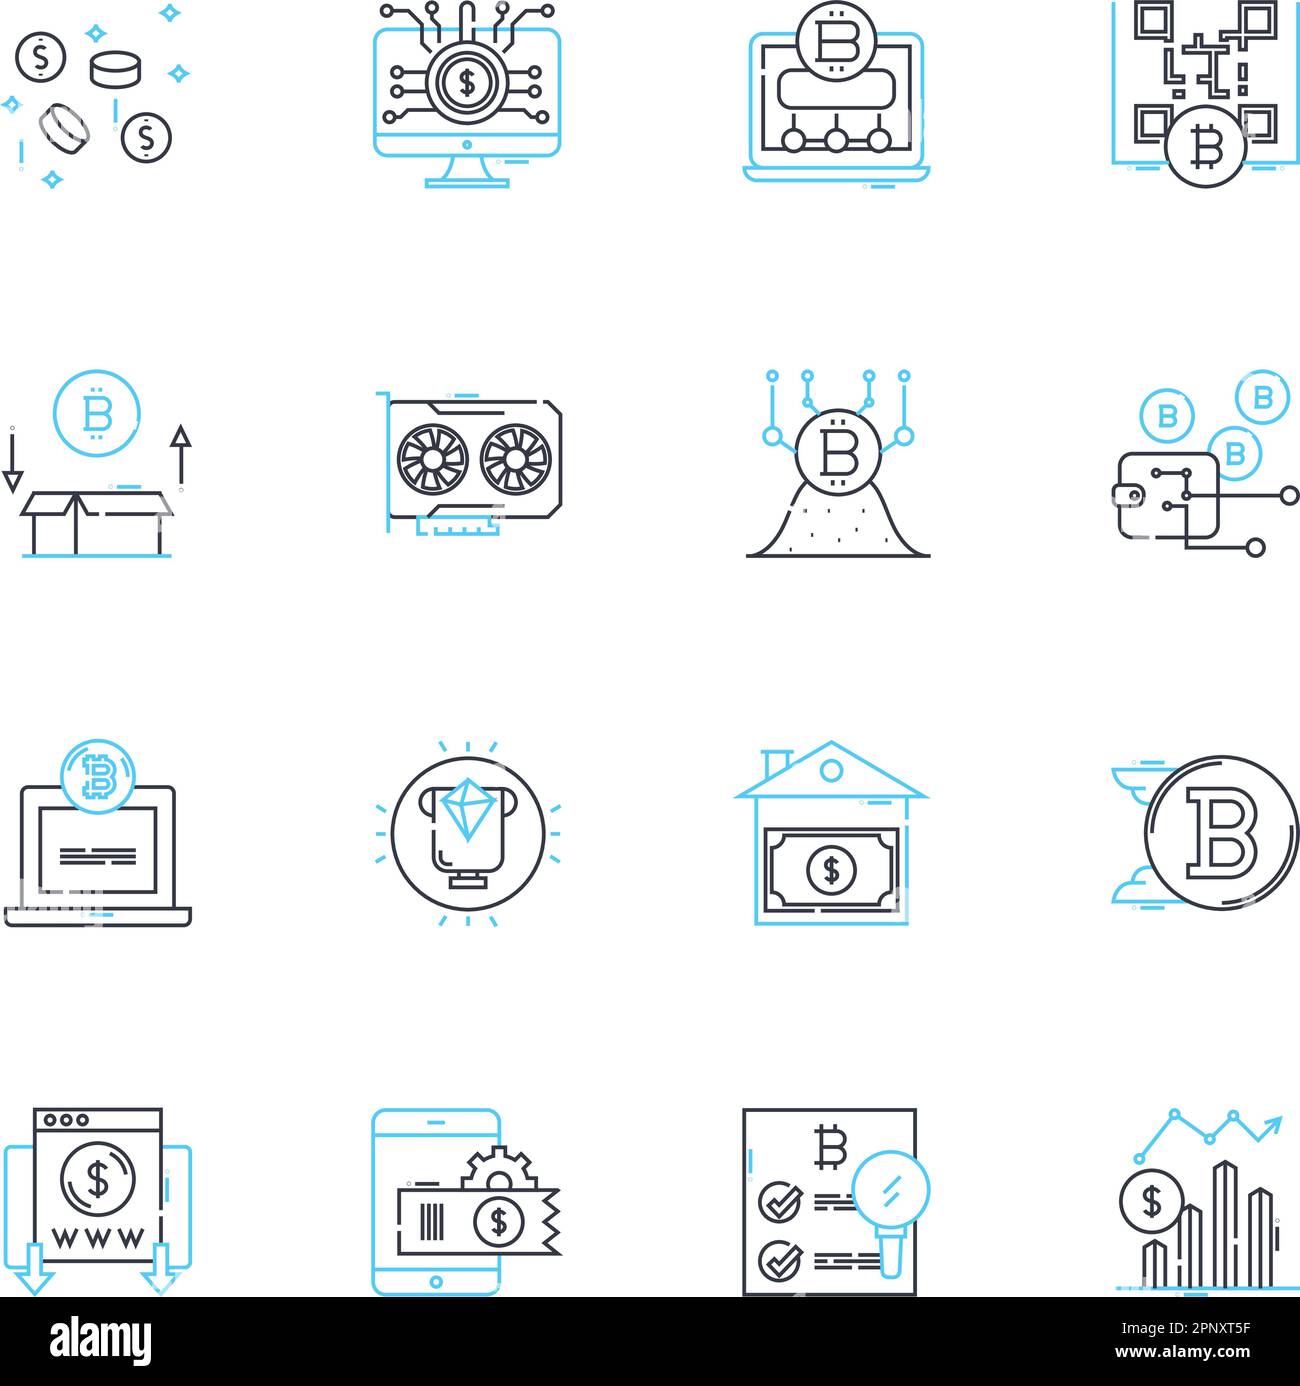 Blockchain technology linear icons set. Decentralization, Cryptocurrency, Security, Transparency, Smart contracts, Immutable, Distributed line vector Stock Vector